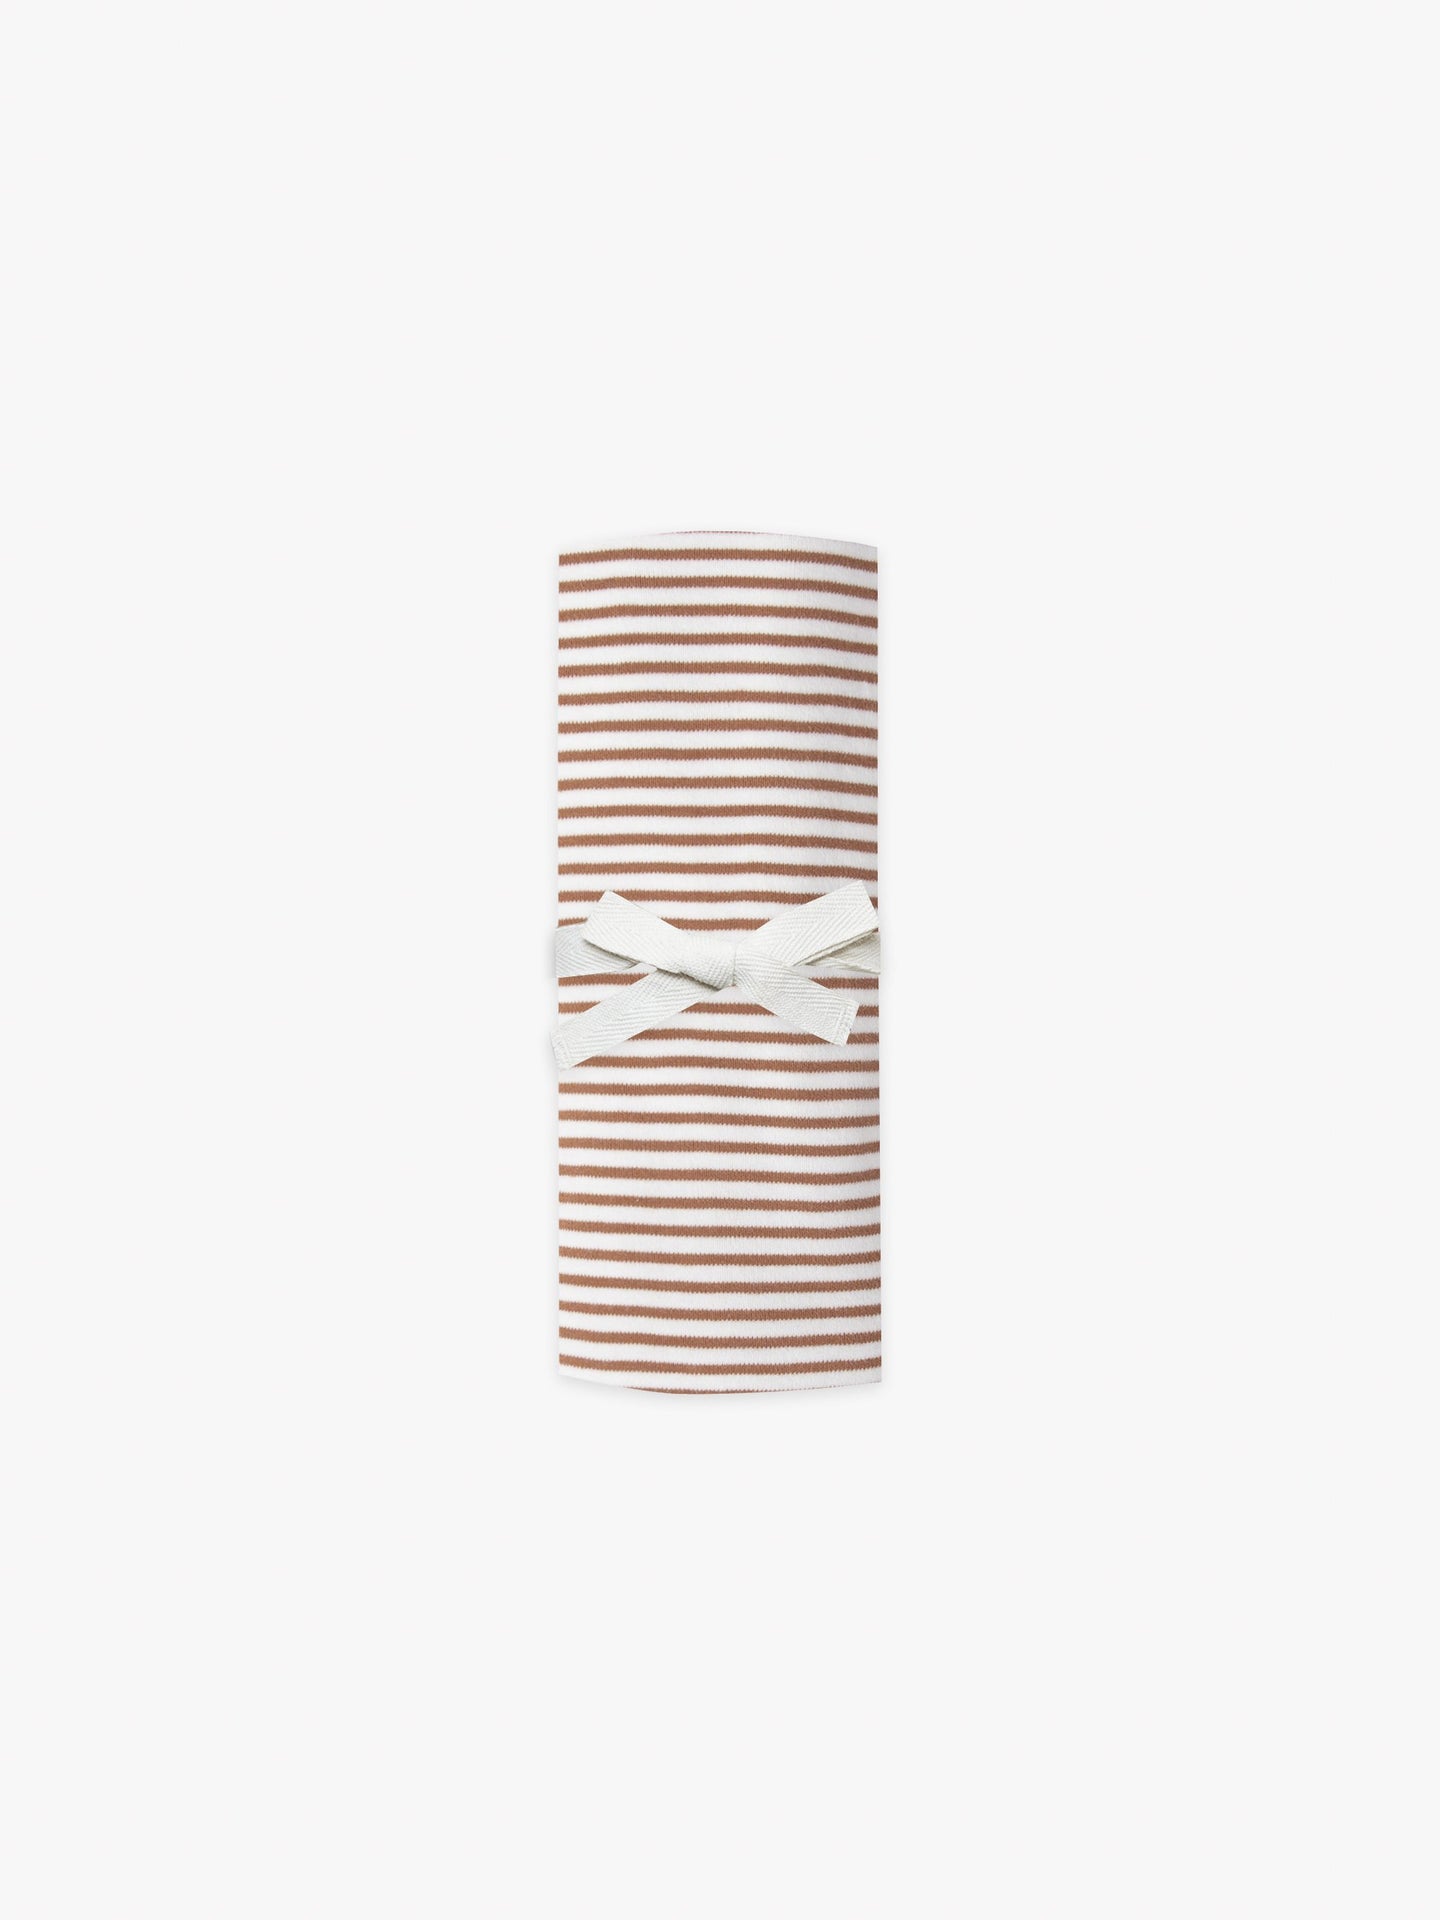 Quincy Mae - Organic Brushed Jersey Baby Swaddle - Rust Stripe